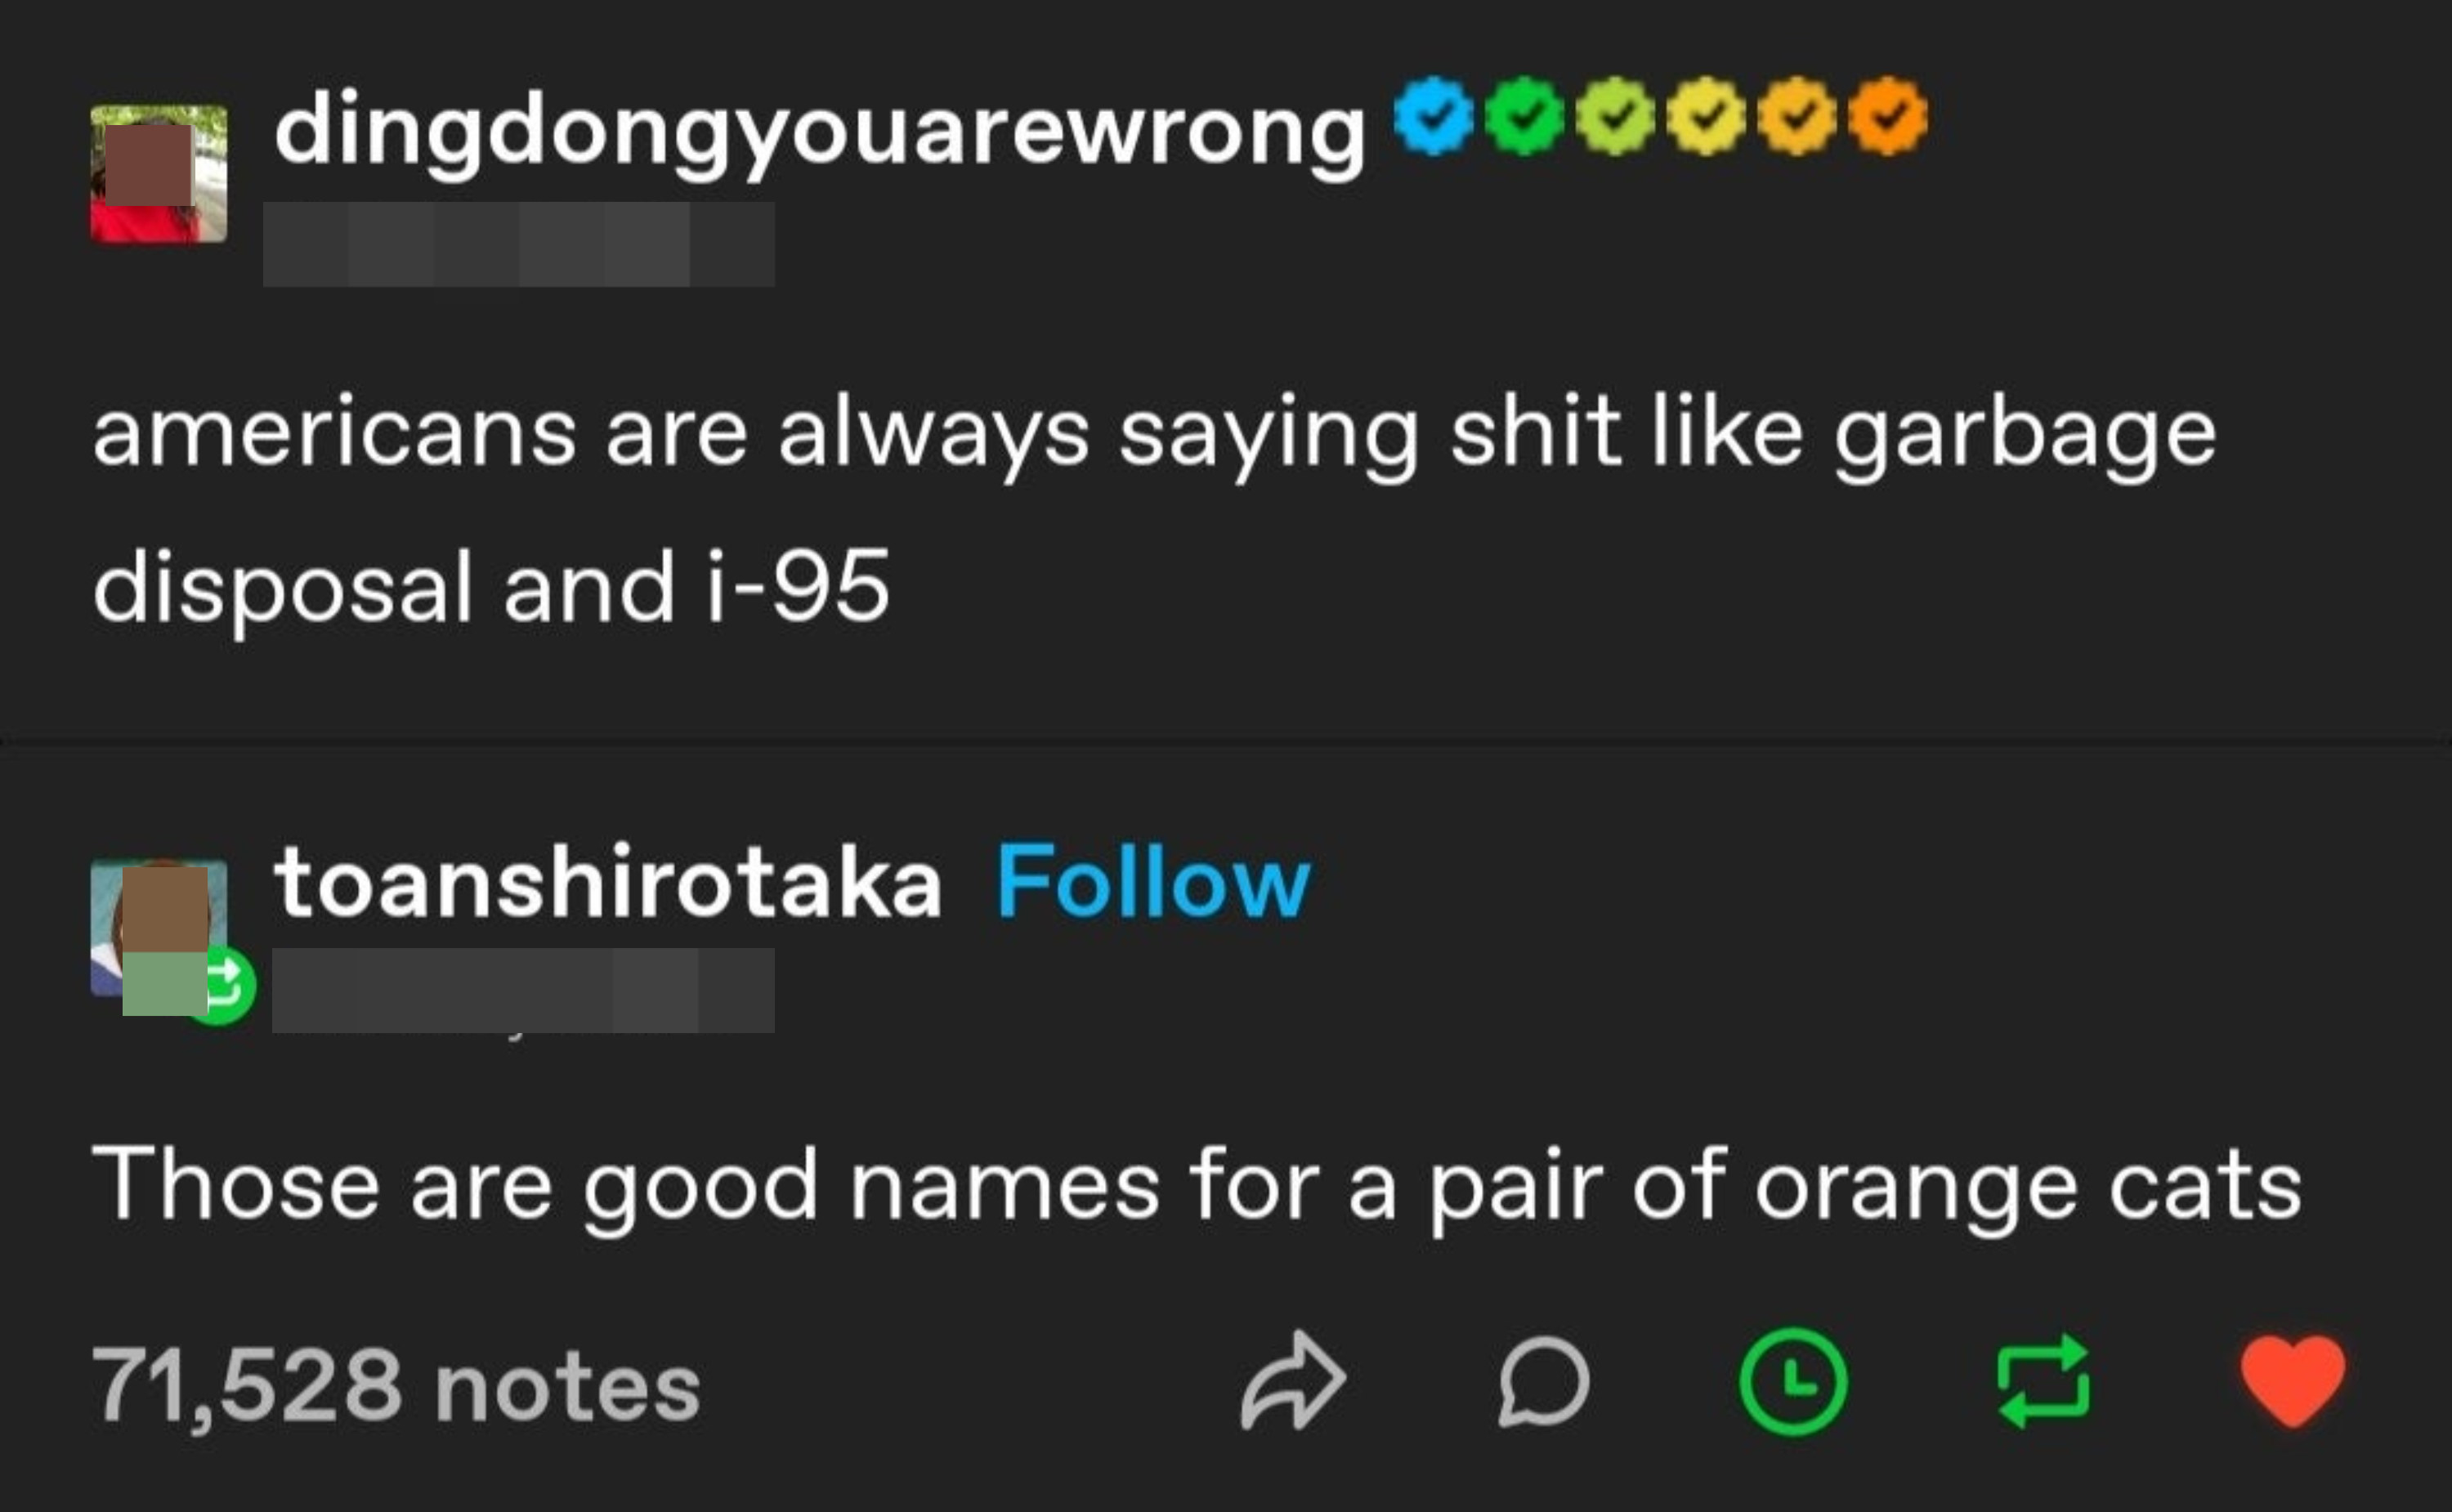 Someone makes fun of Americans saying they always say things like garbage disposal and i-95, and someone says they&#x27;d be good names for a pair of orange cats